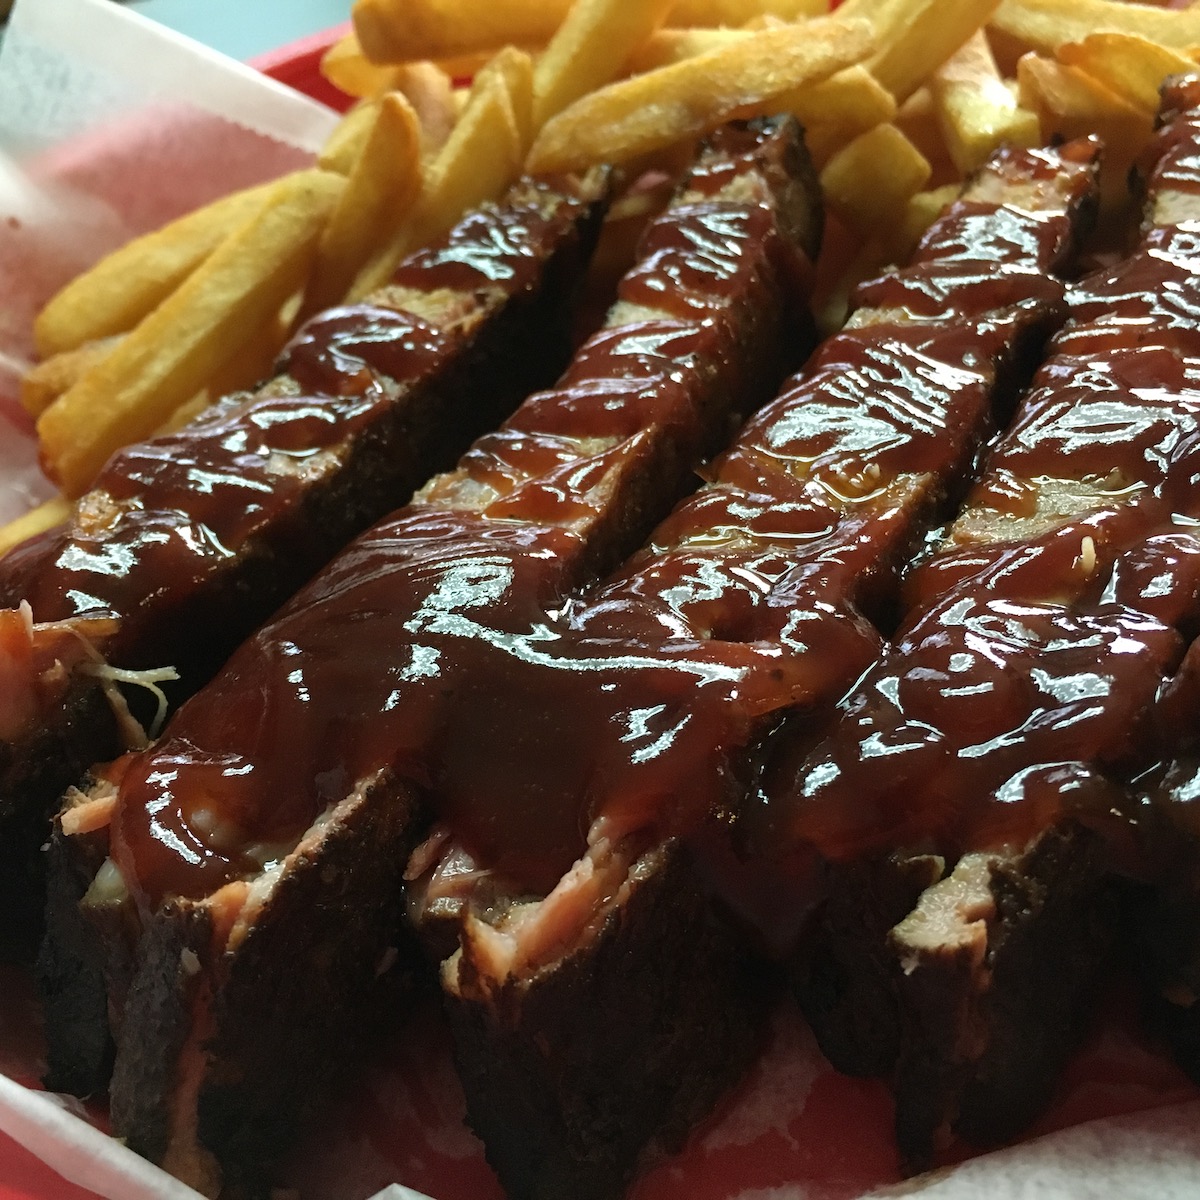 Ribs from Hate Mondays Tavern in Miami, Florida